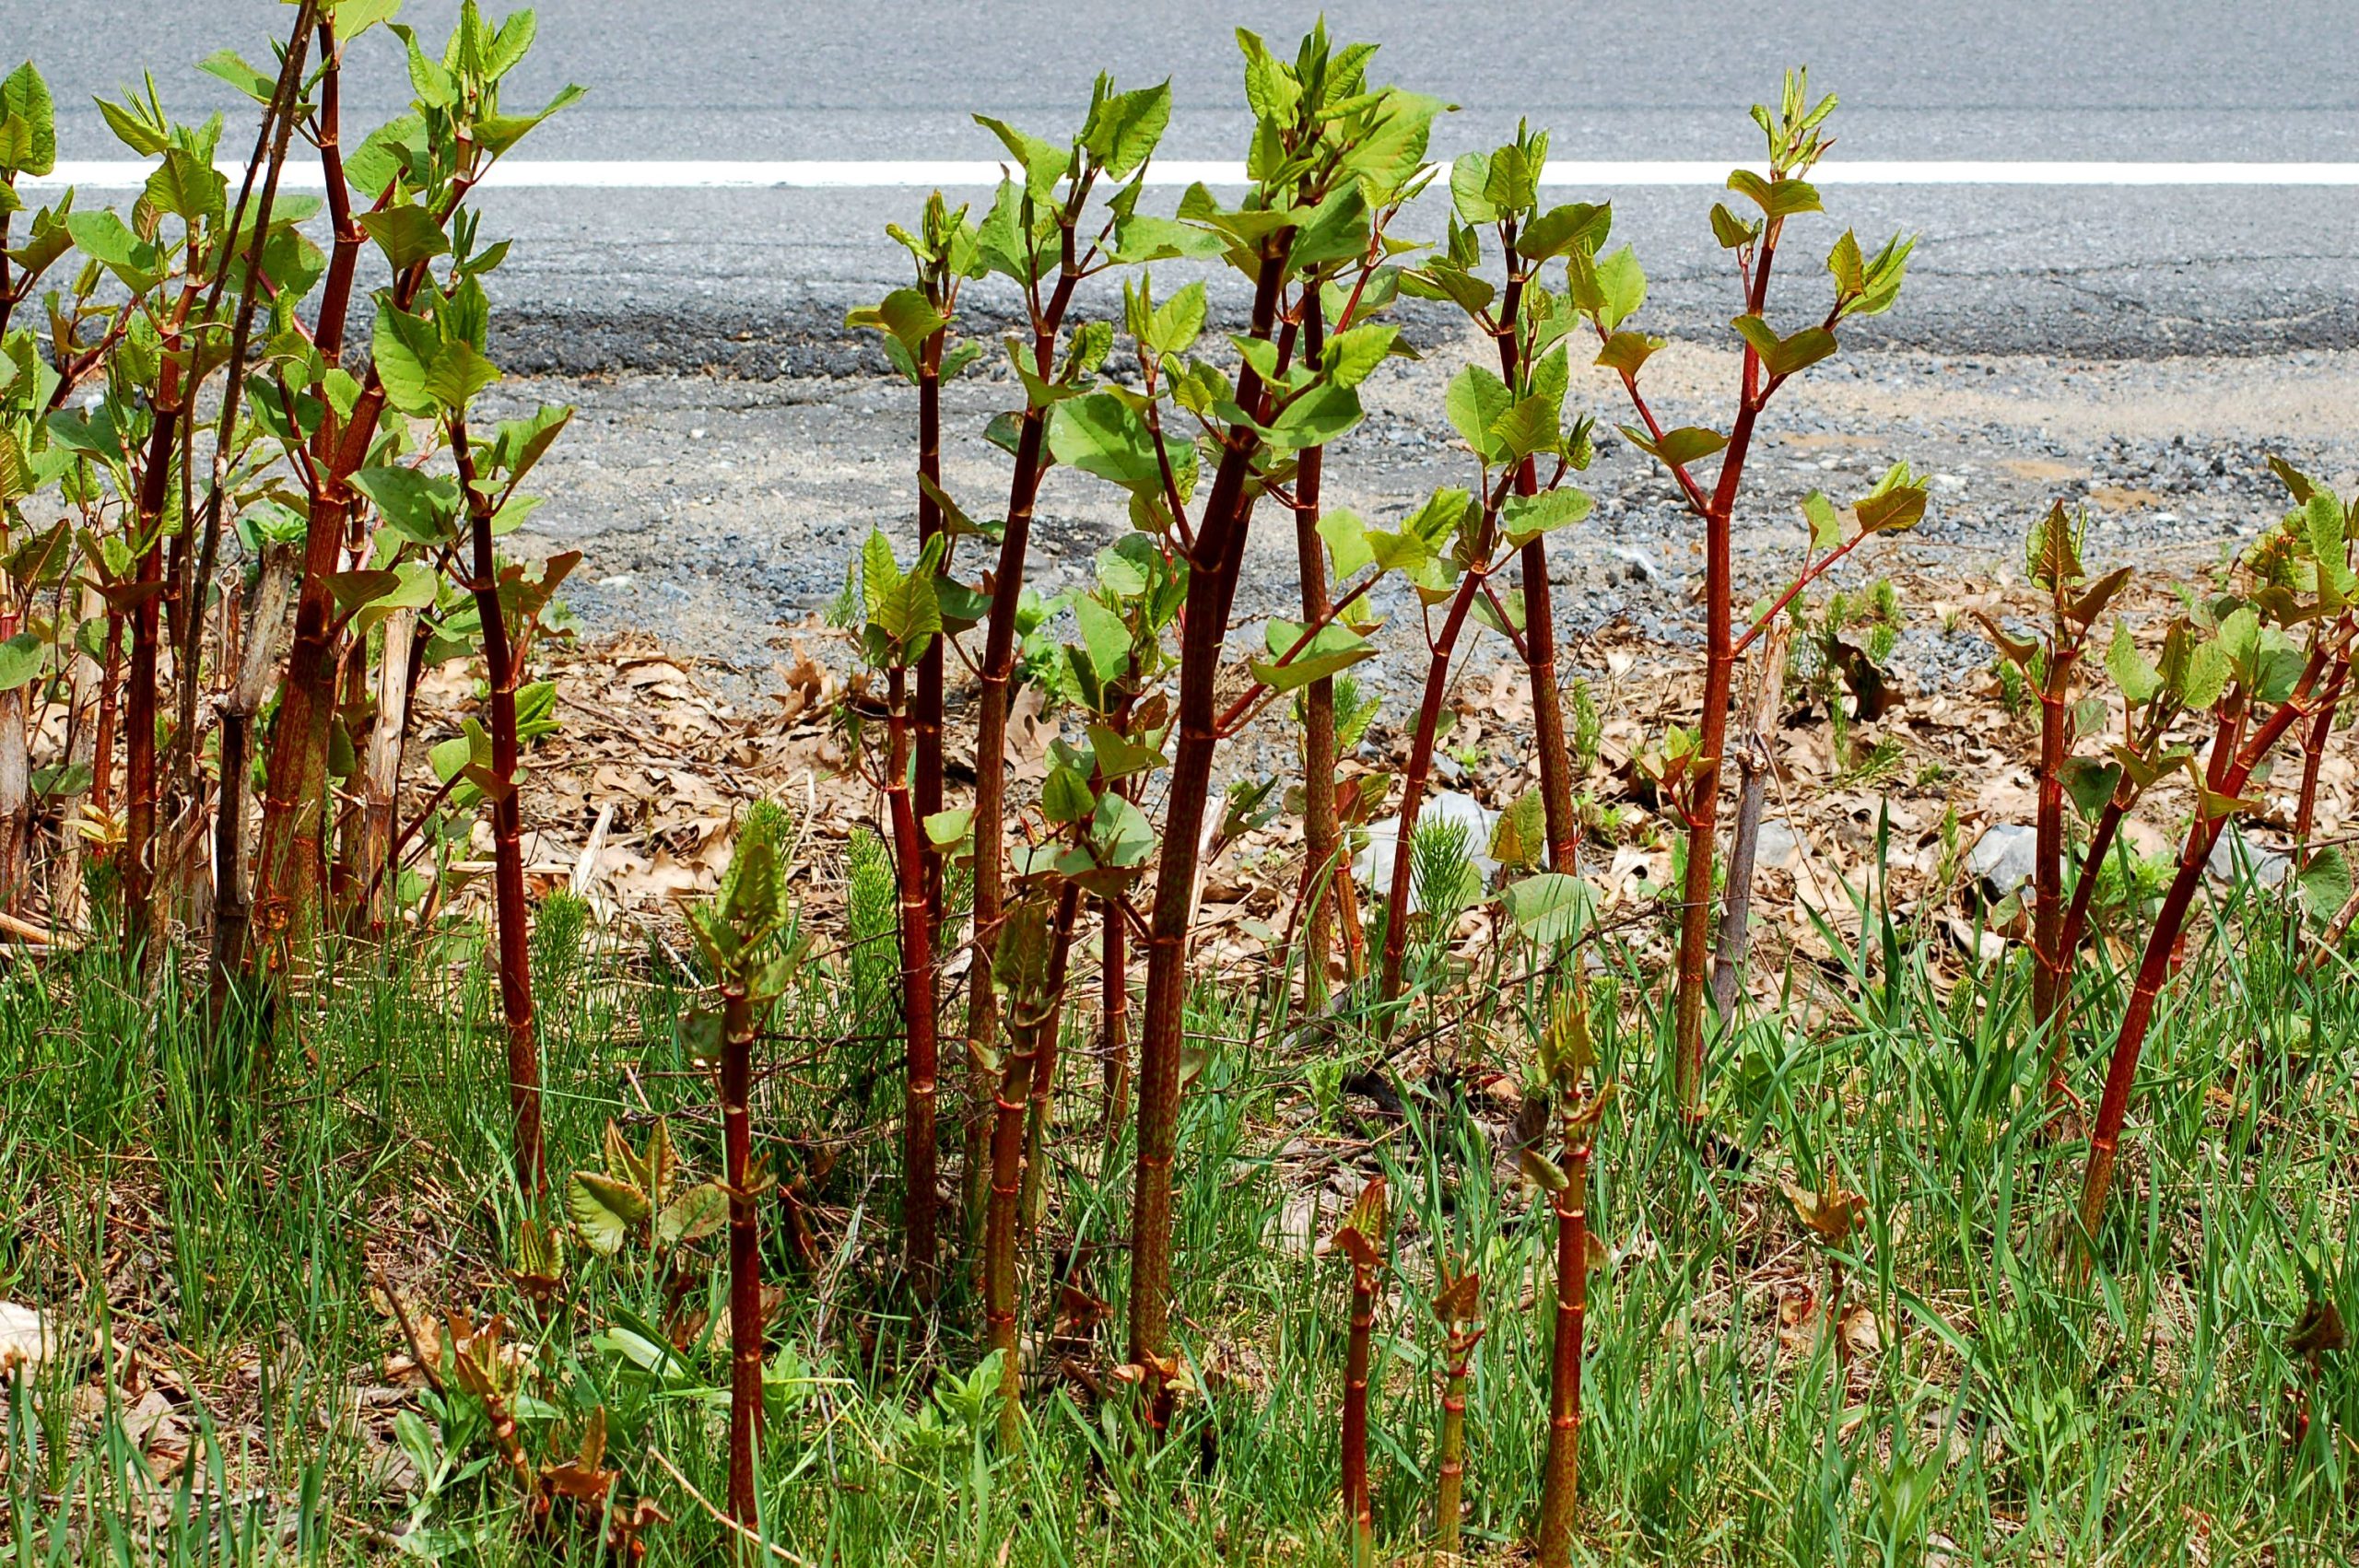 How to buy a property with Japanese knotweed